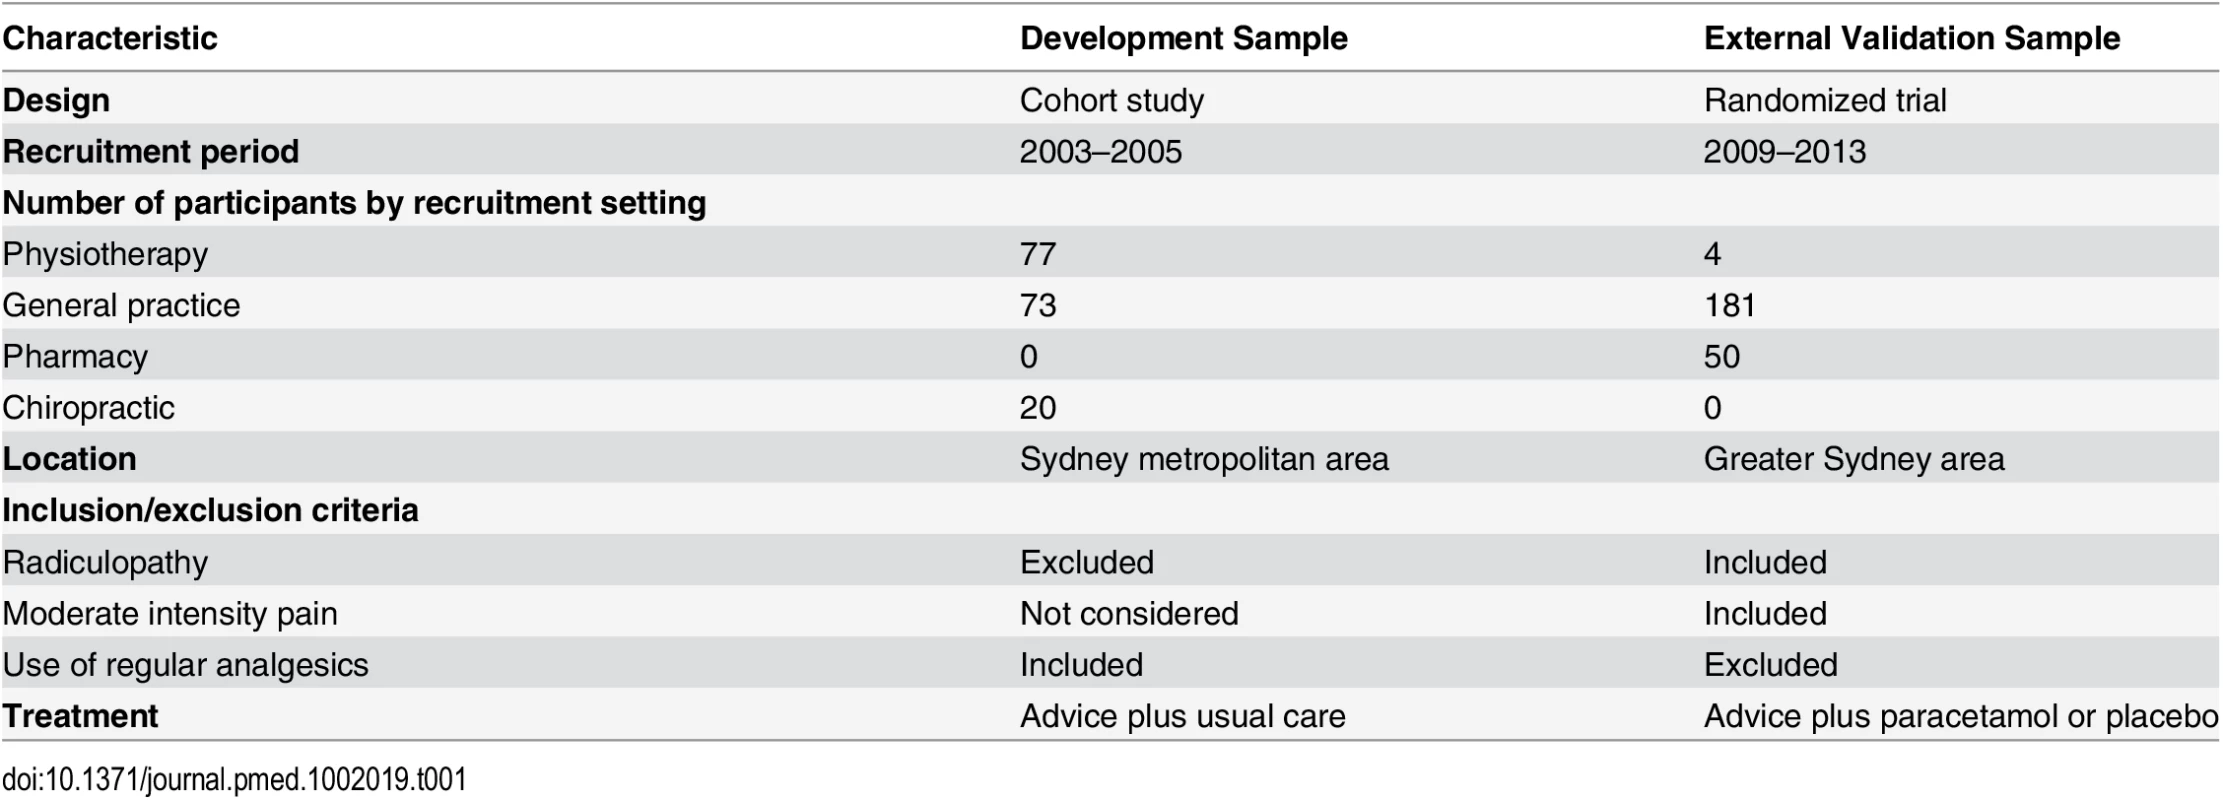 Key differences in the development and external validation studies.